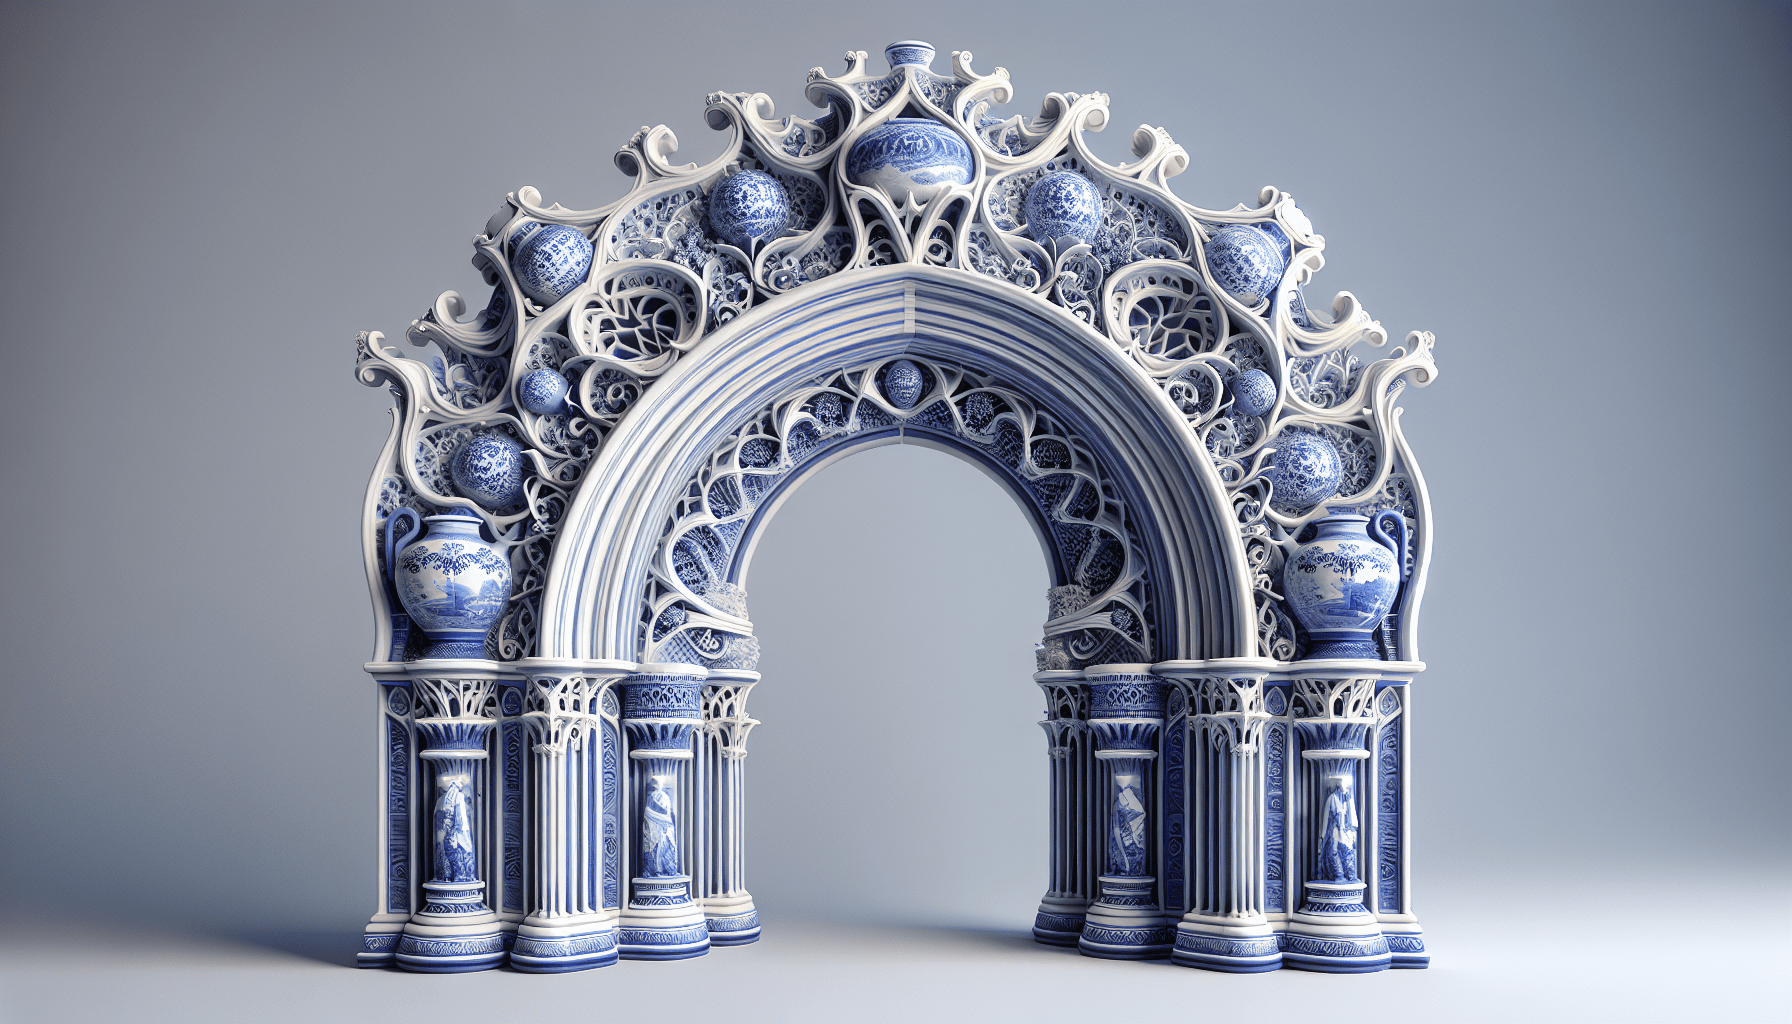 new-delft-blue-3d-printed-ceramic-archway-by-studio-rap New Delft Blue: 3D-Printed Ceramic Archway by Studio RAP